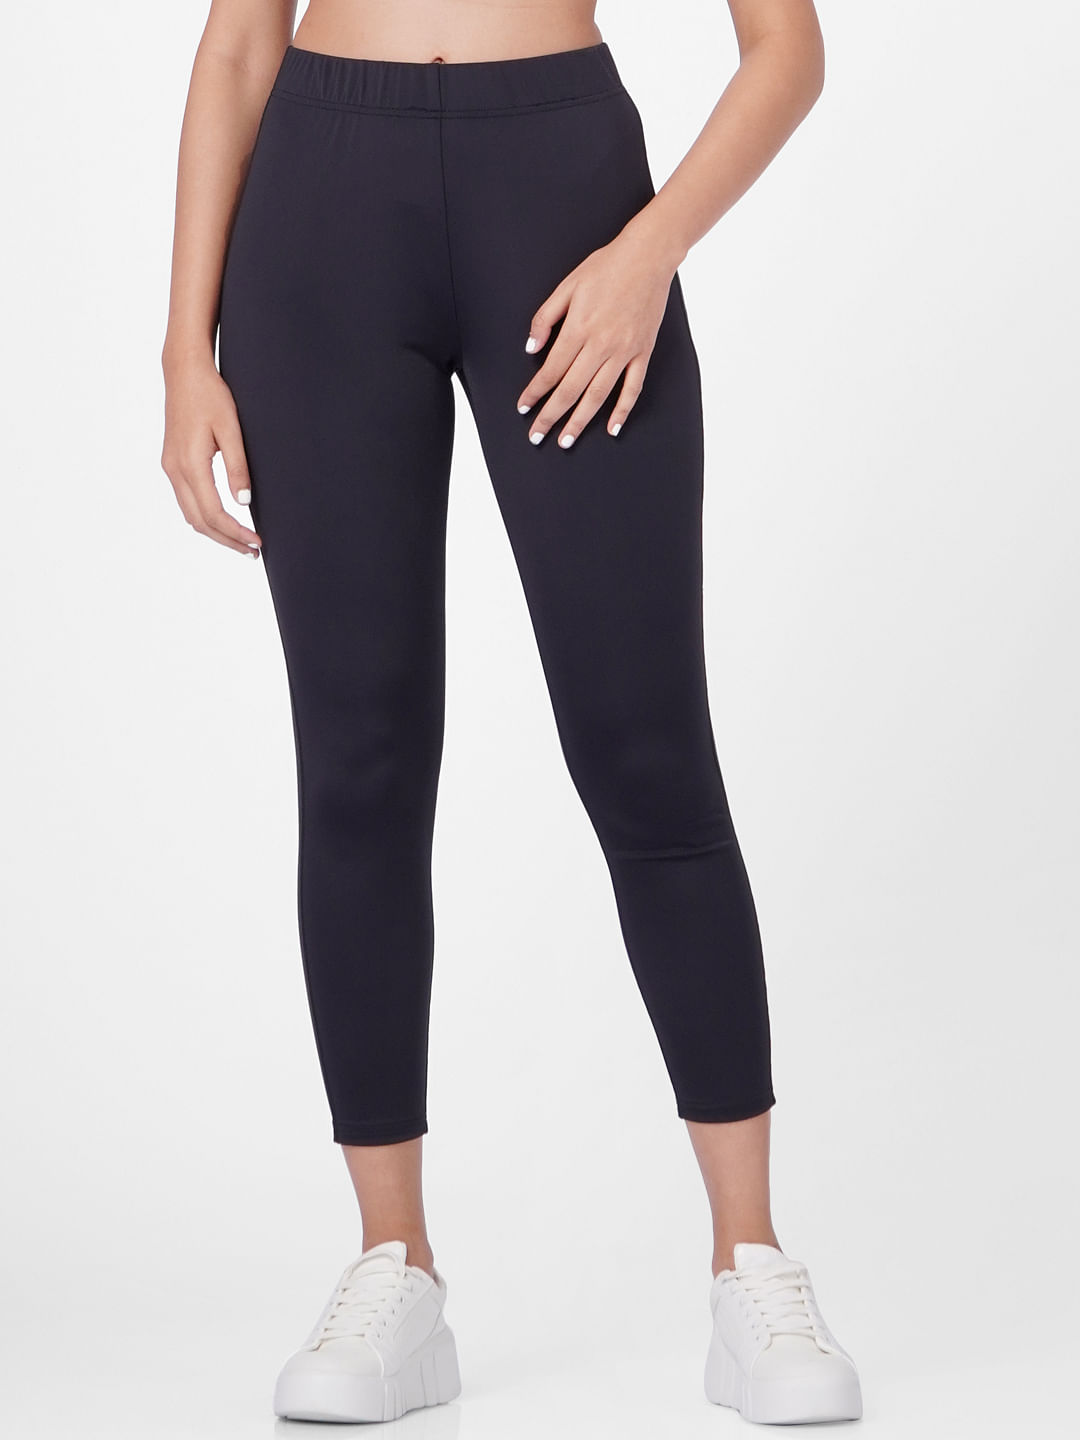 Zara Ribbed Leggings Co Ordering | International Society of Precision  Agriculture